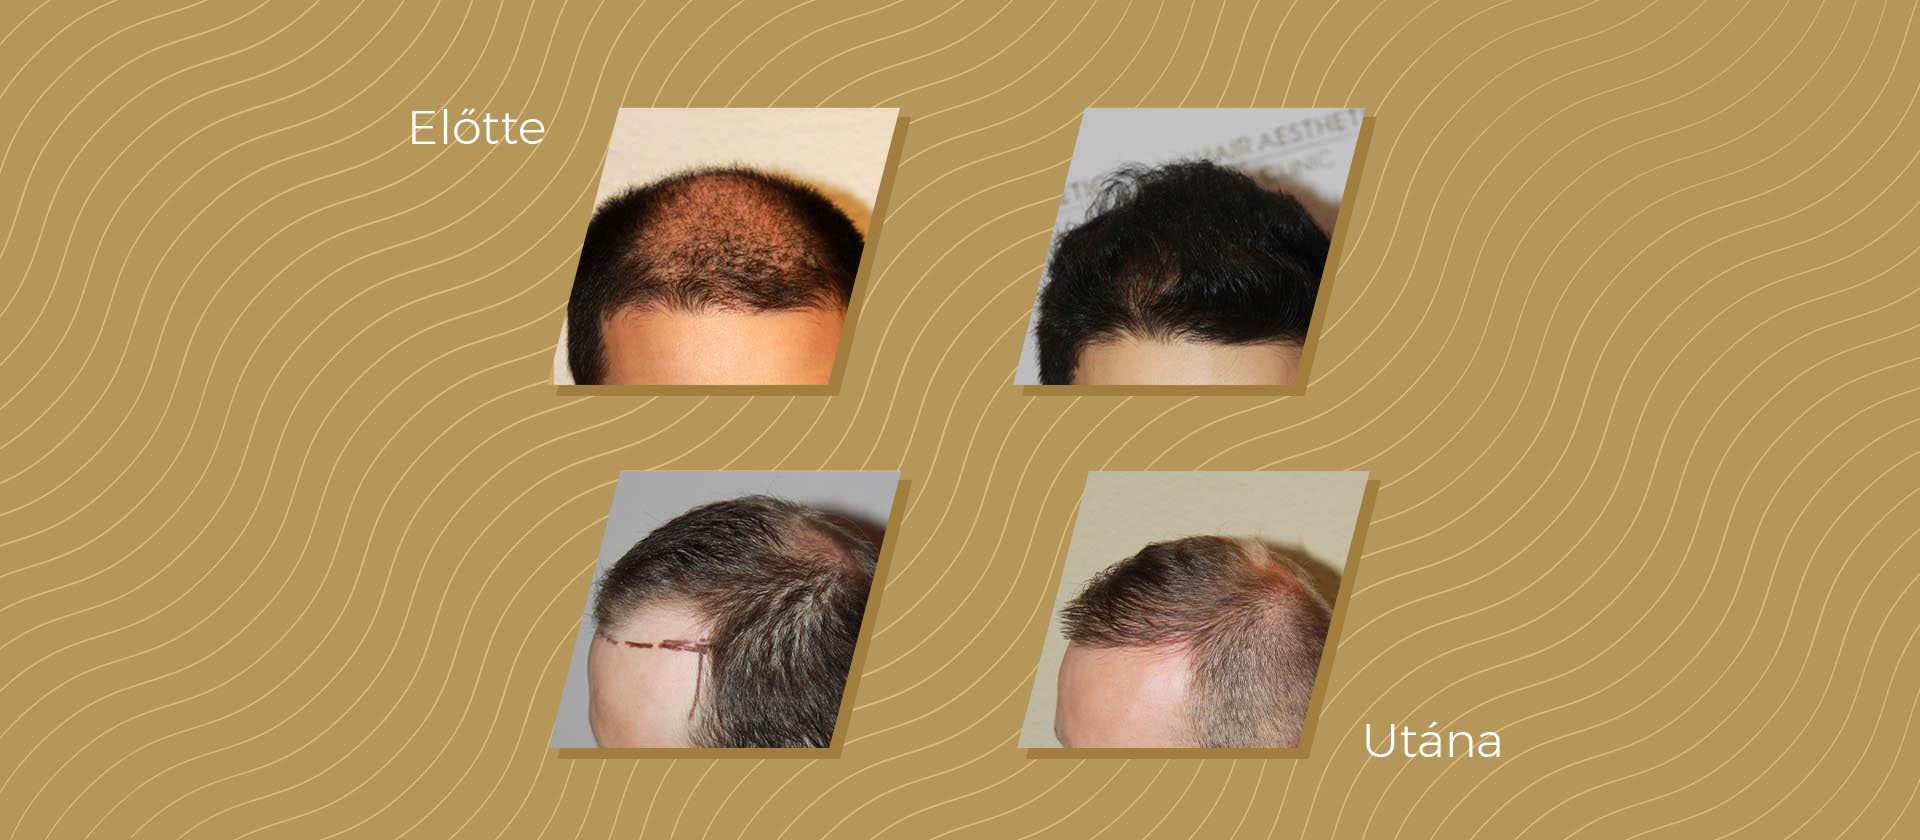 Regenerative therapy against hair loss